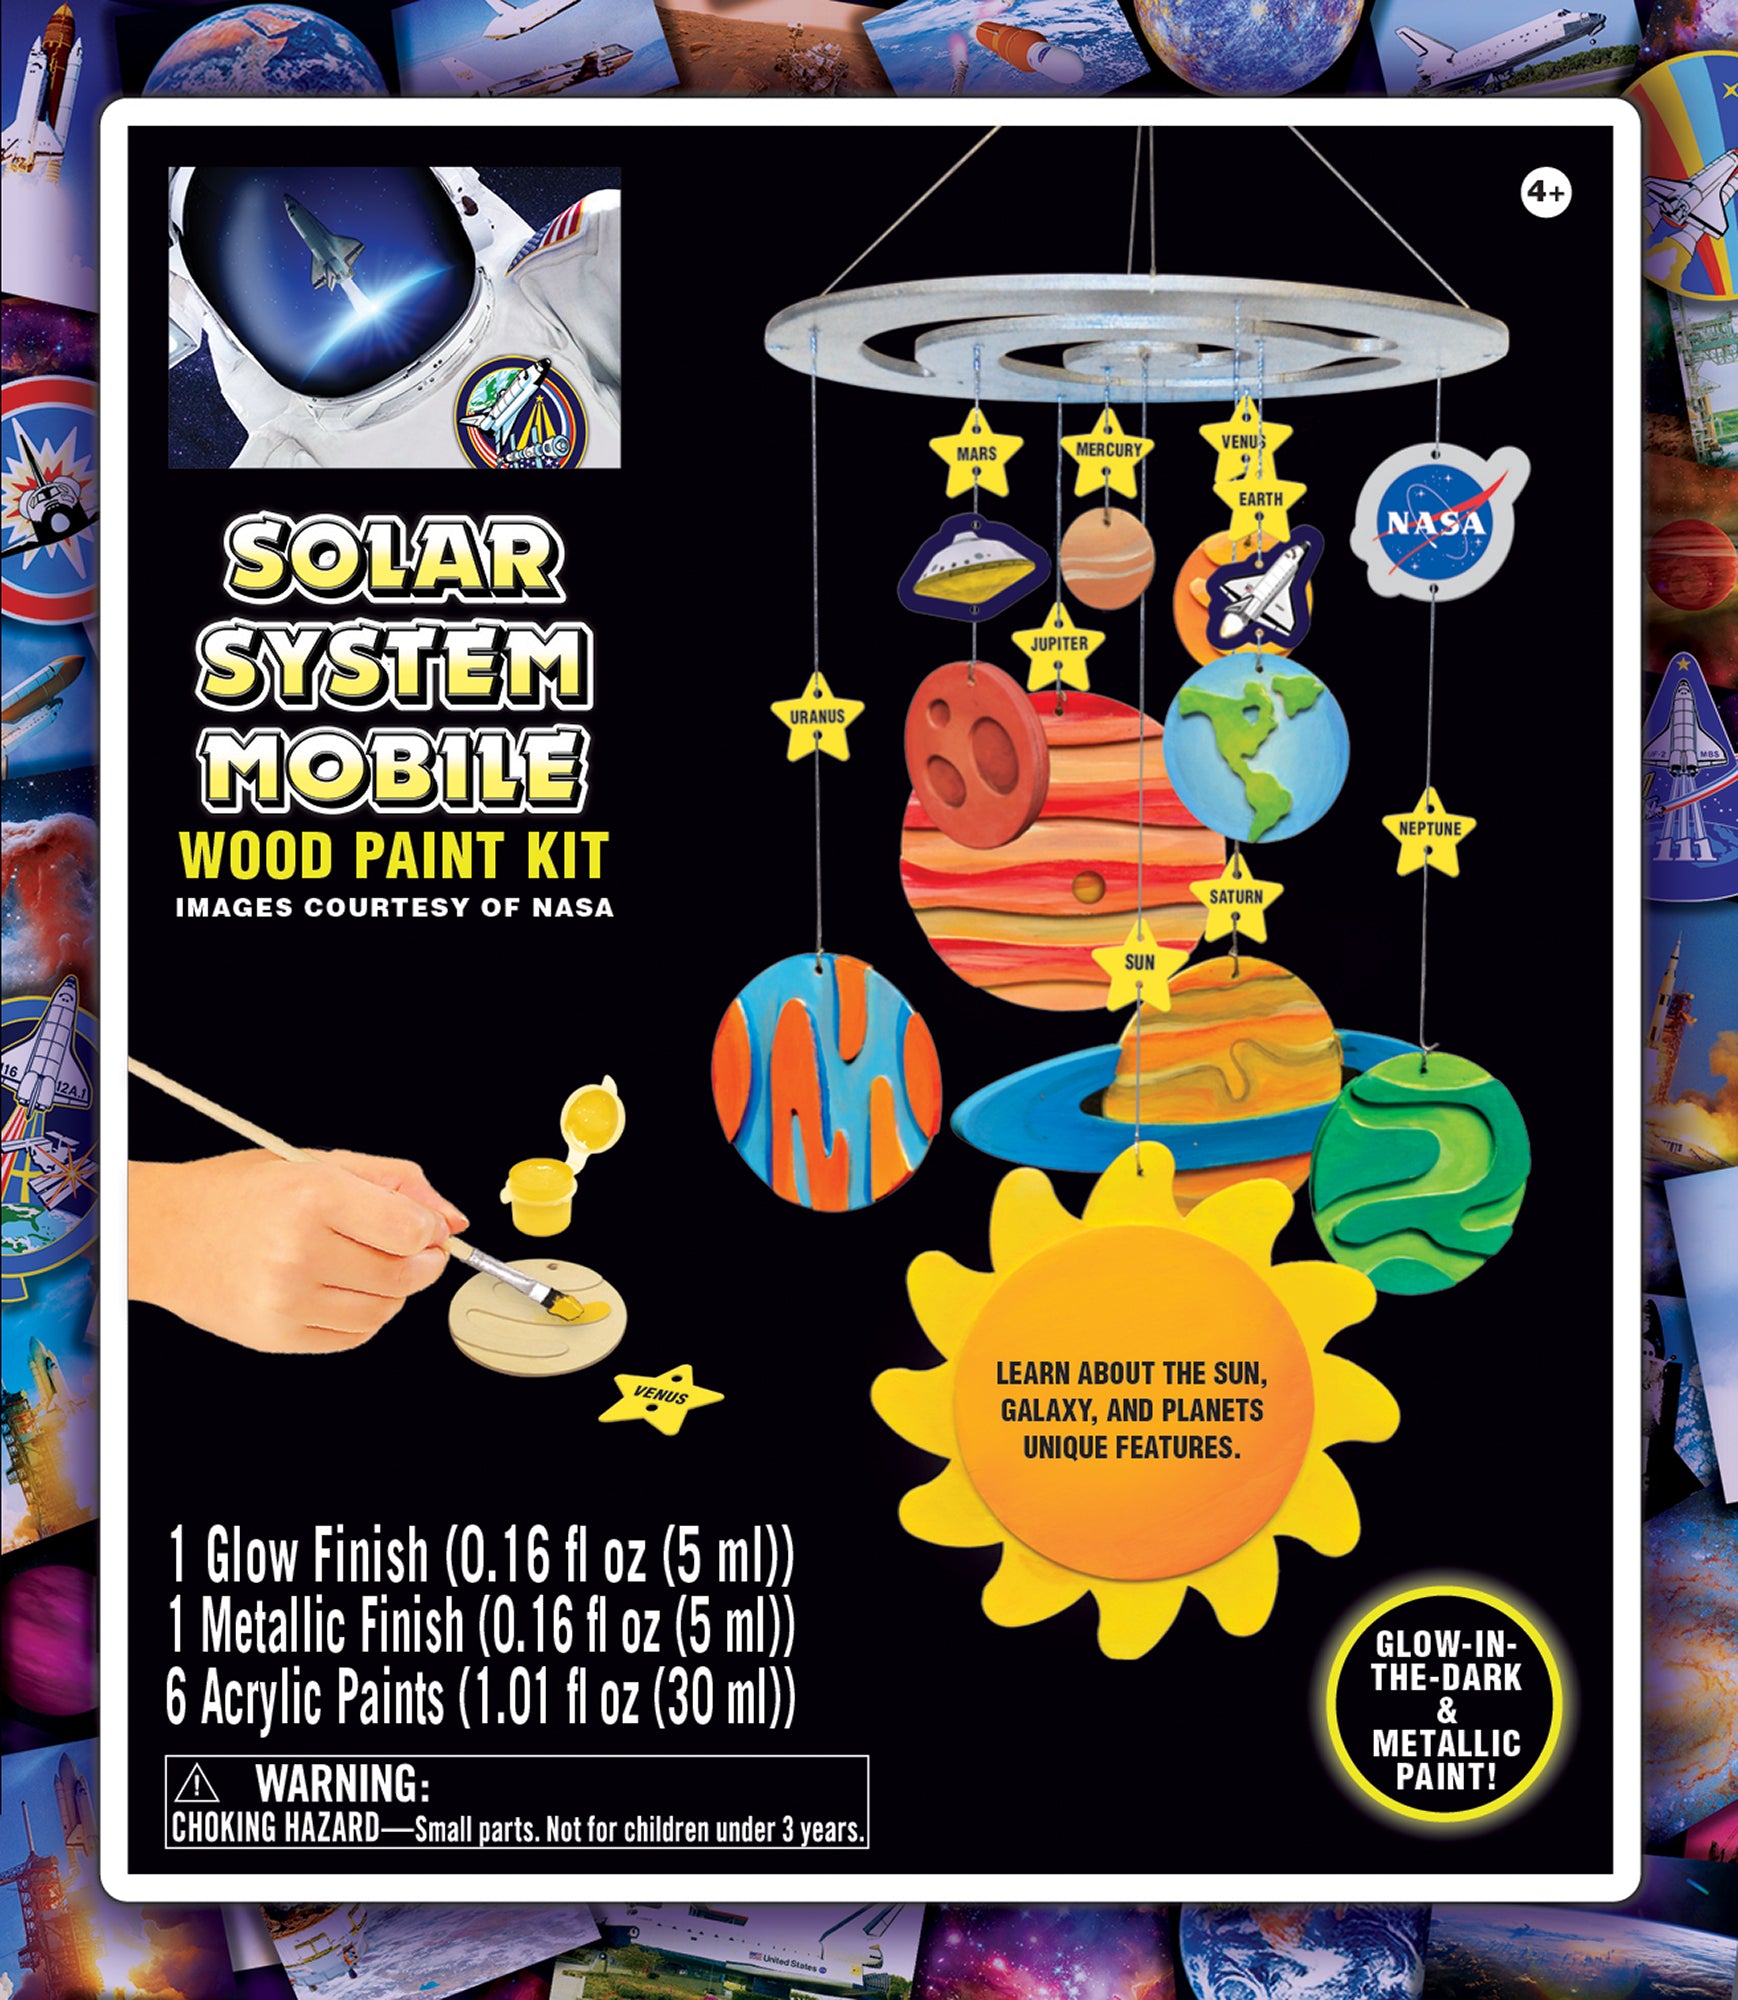 Paint your own Solar System Mobile Paint Kit was featured in the September 2015 edition of the Lunar and Planetary Information Bulletin as a “New and Noteworthy” item.